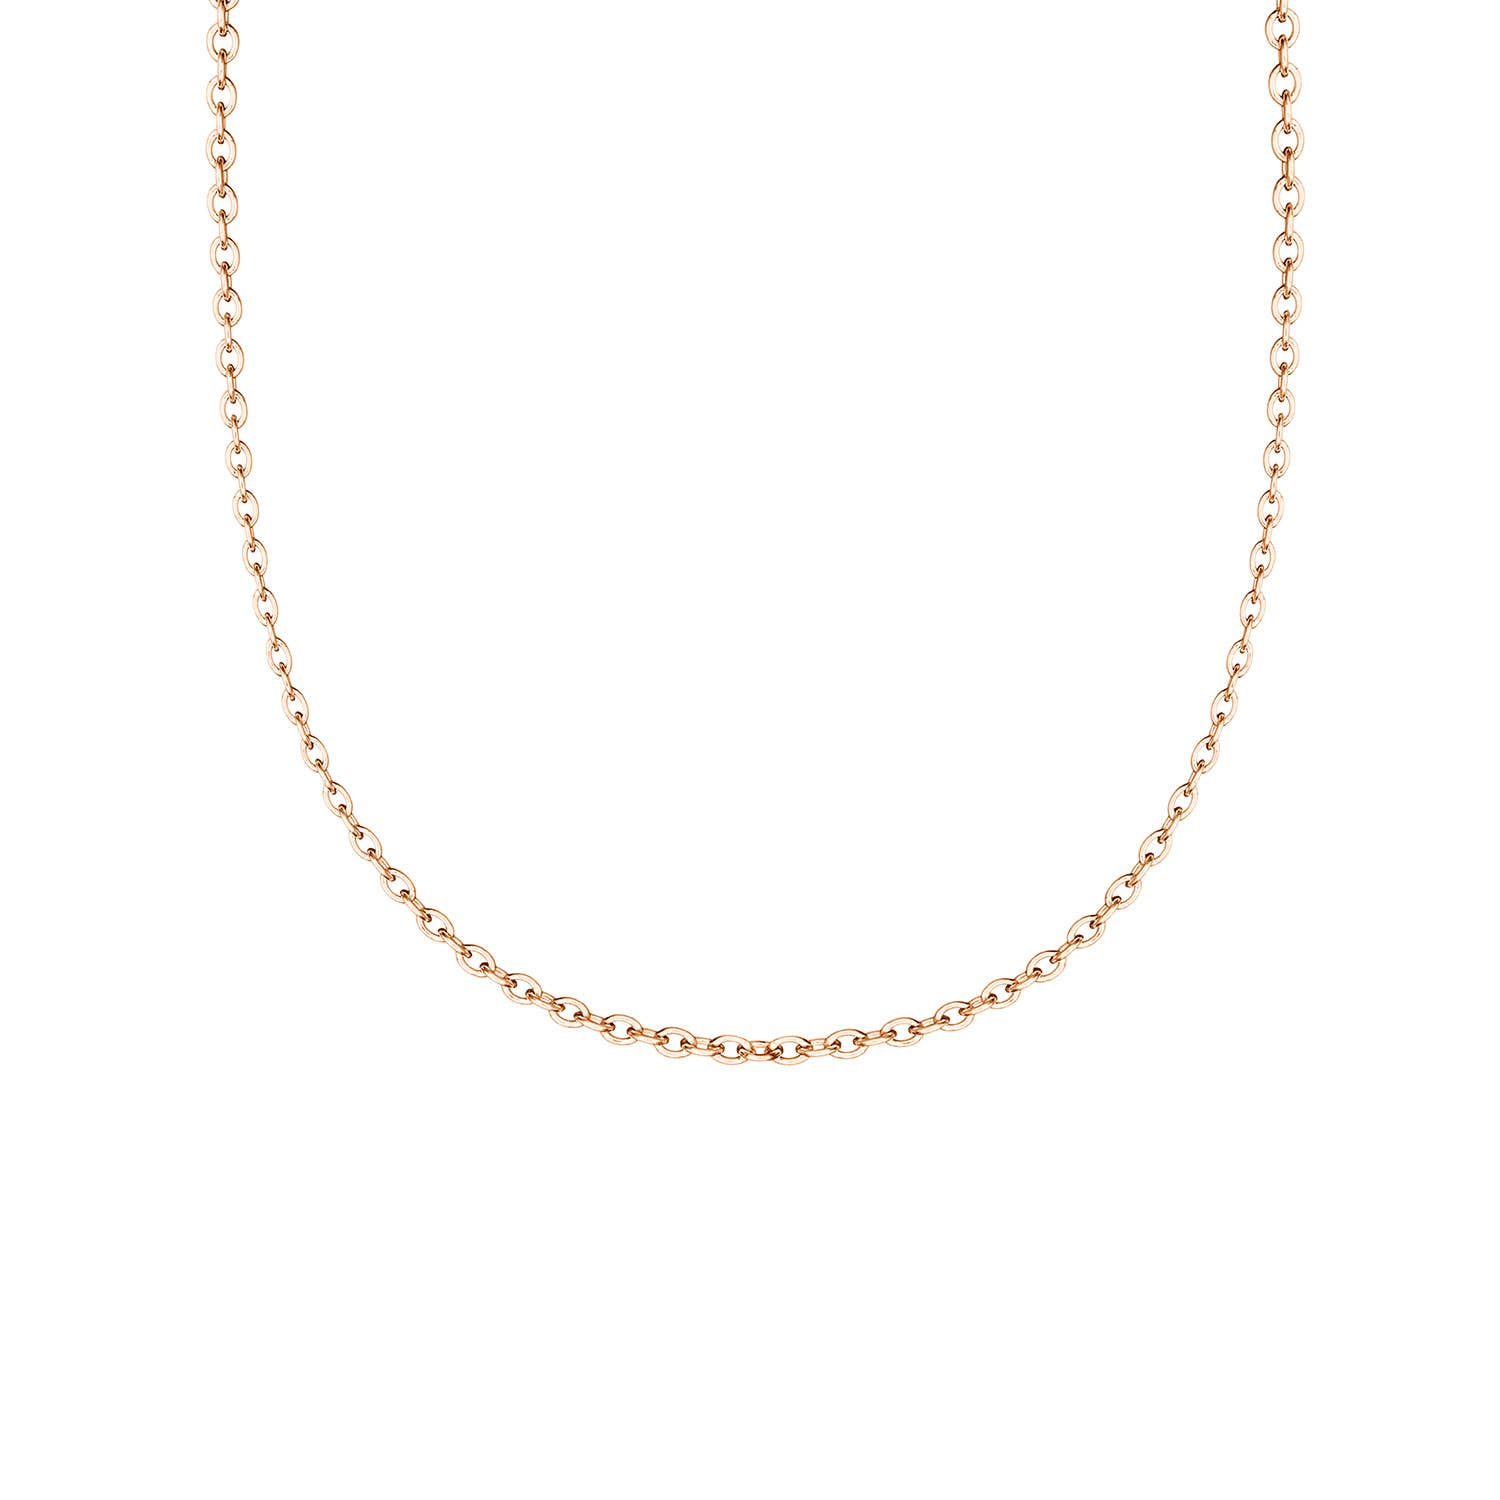 Rose Gold Chain - 18 inches